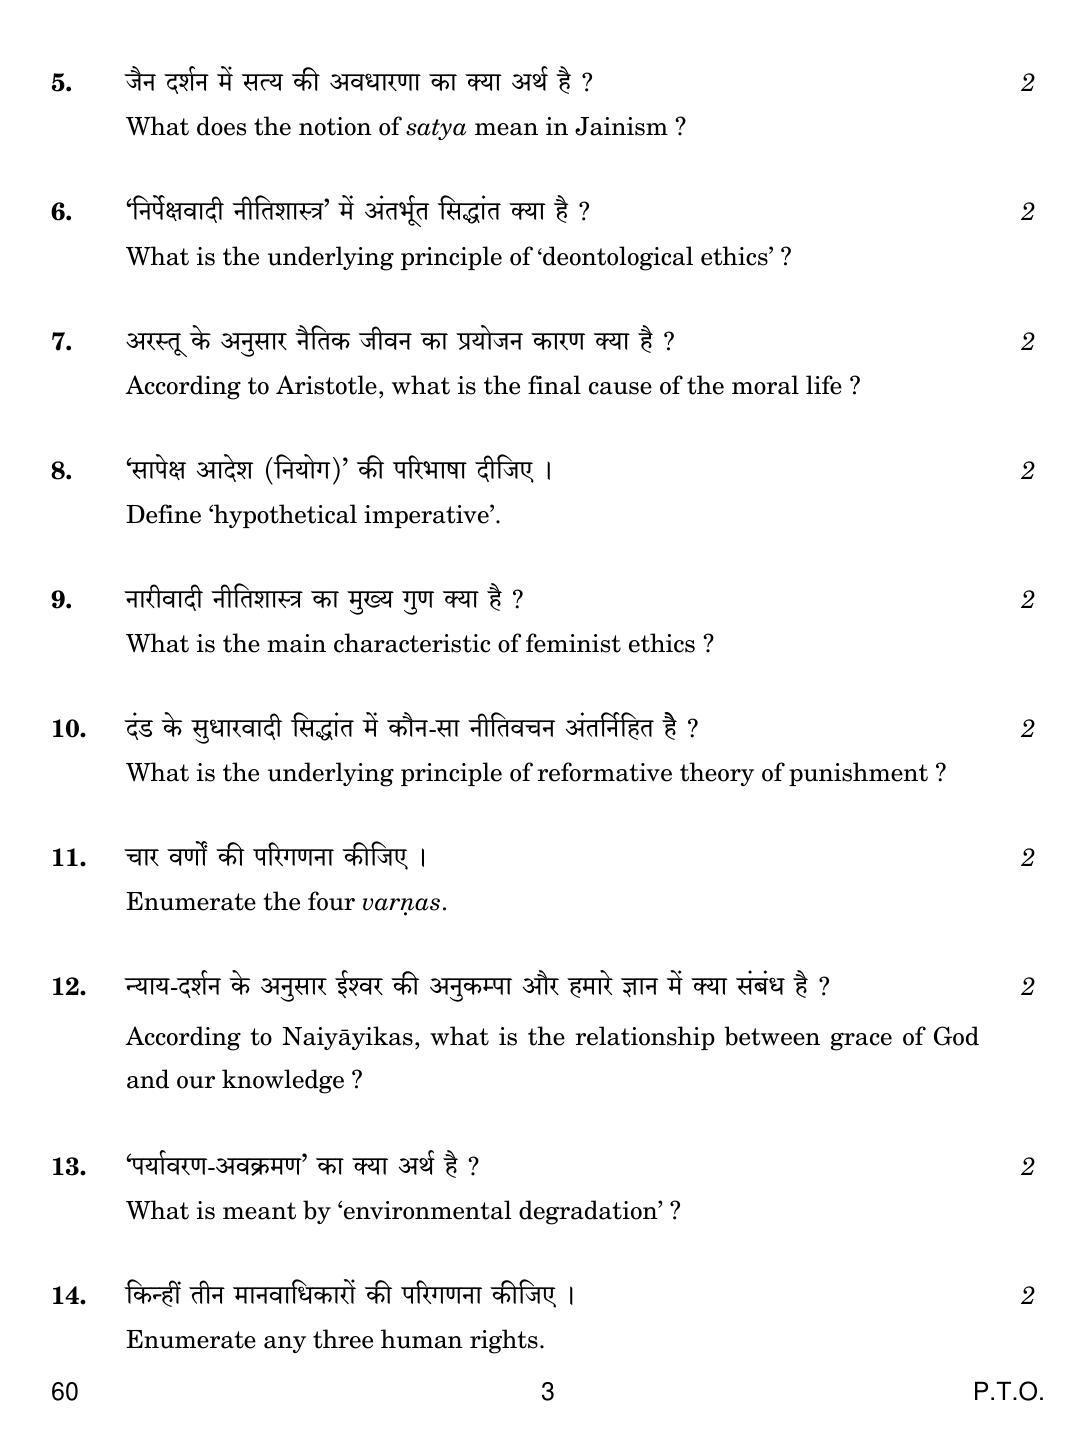 CBSE Class 12 60 PHILOSOPHY 2019 Compartment Question Paper - Page 3